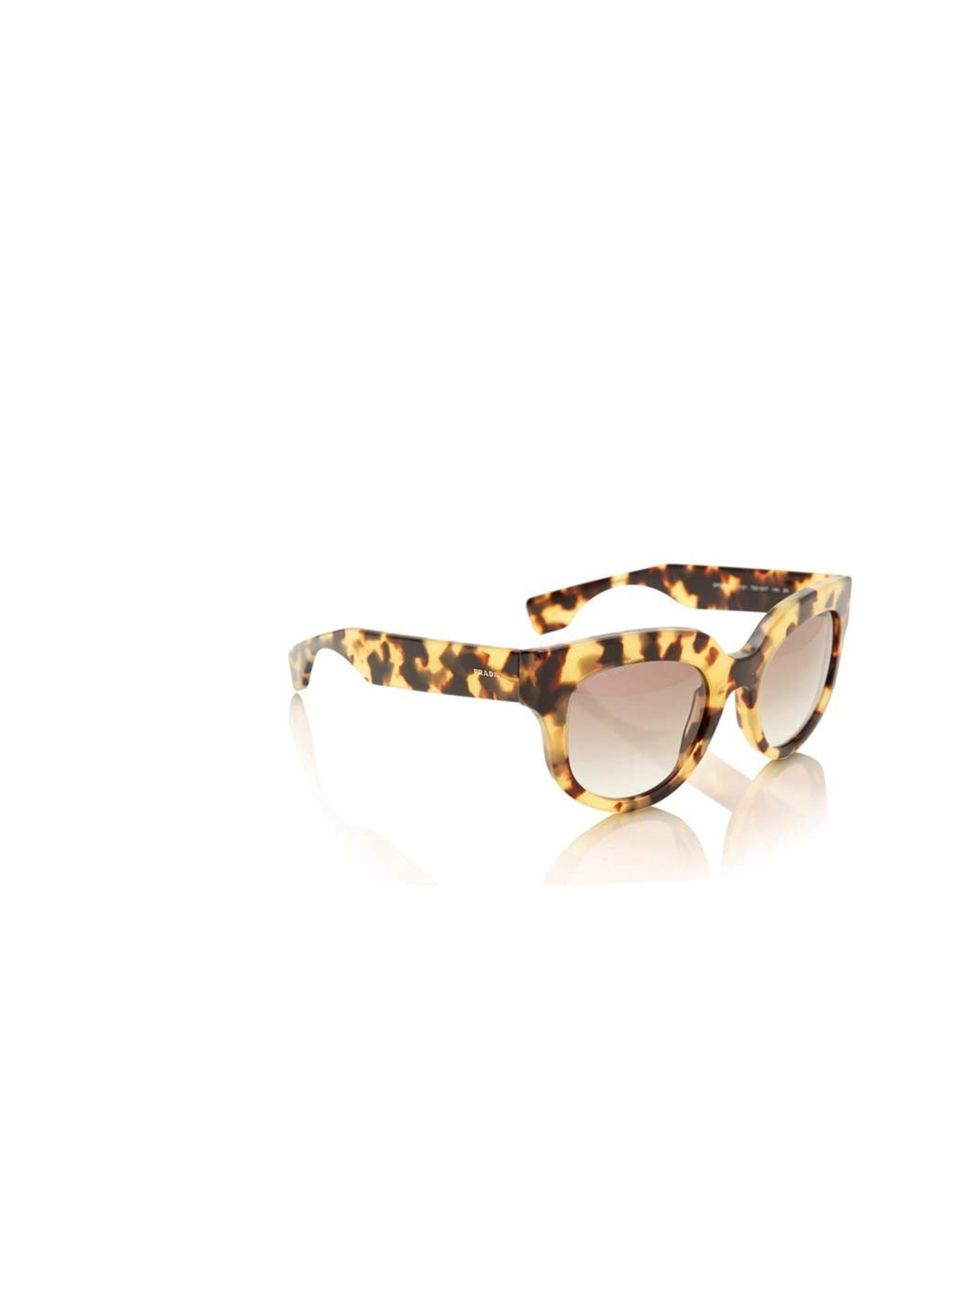 <p>Shield your eyes from the cold, hard light of January with these sophisticated tortoiseshell sunnies.</p><p>Prada sunglasses, £230 at <a href="http://www.liberty.co.uk/fcp/product/Liberty//Brown-Camouflage-Poeme-Acetate-Sunglasses/97835">Liberty</a></p